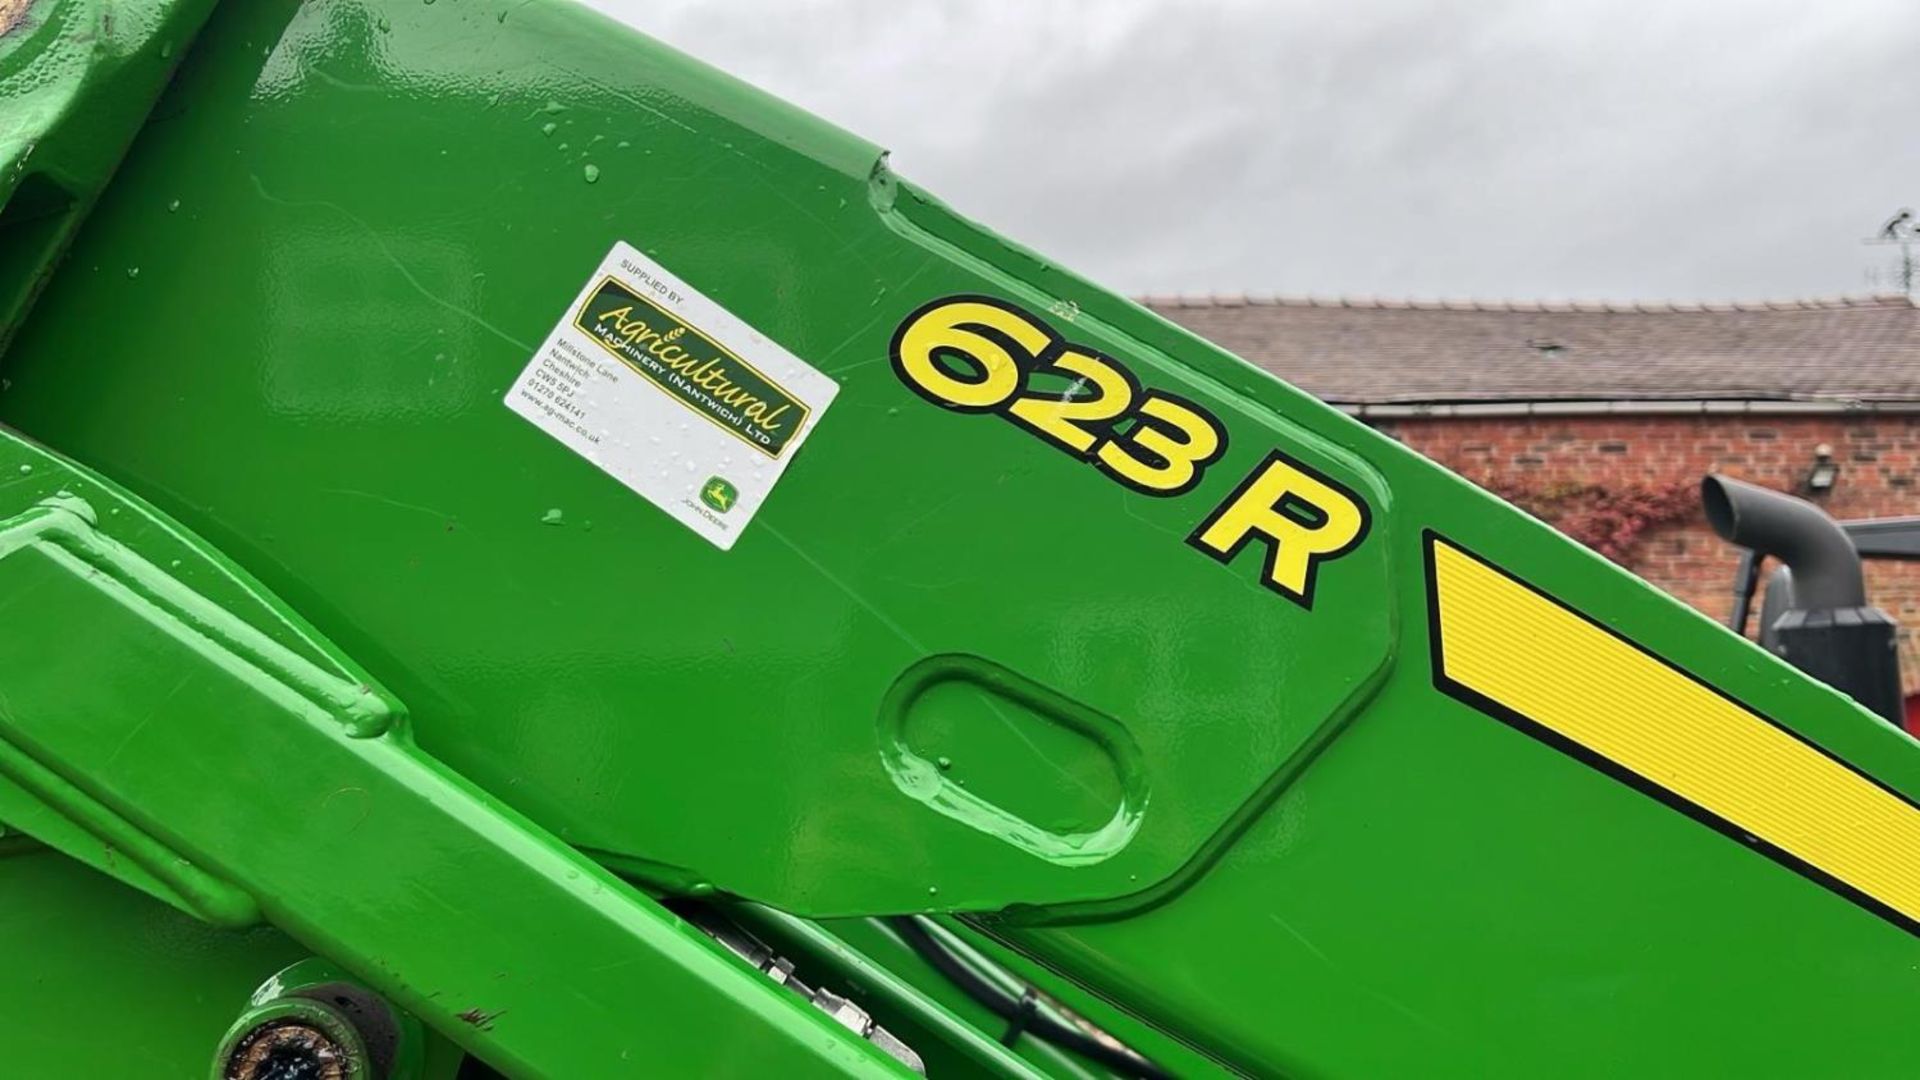 2019 JOHN DEERE 6115RC TRACTOR PE19HBL 115 HP WITH JOHN DEERE 623R FRONT LOADER 1279 HOURS AT - Image 25 of 35